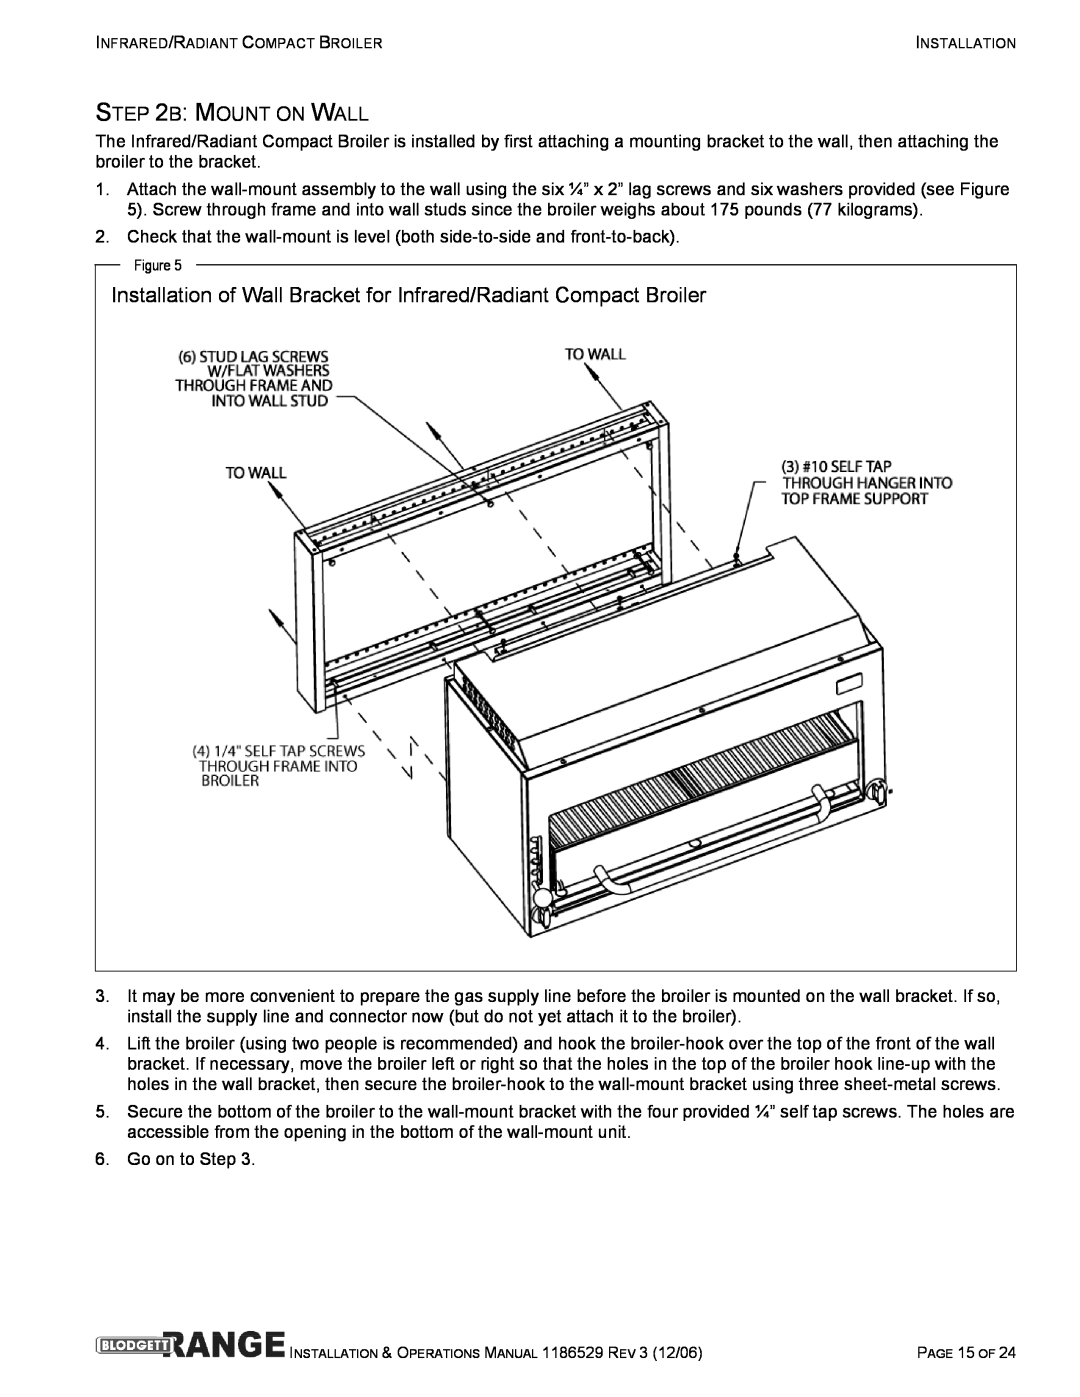 Blodgett B36-NFR, B48-RAD, B48-NFR manual Installation of Wall Bracket for Infrared/Radiant Compact Broiler, B Mount On Wall 